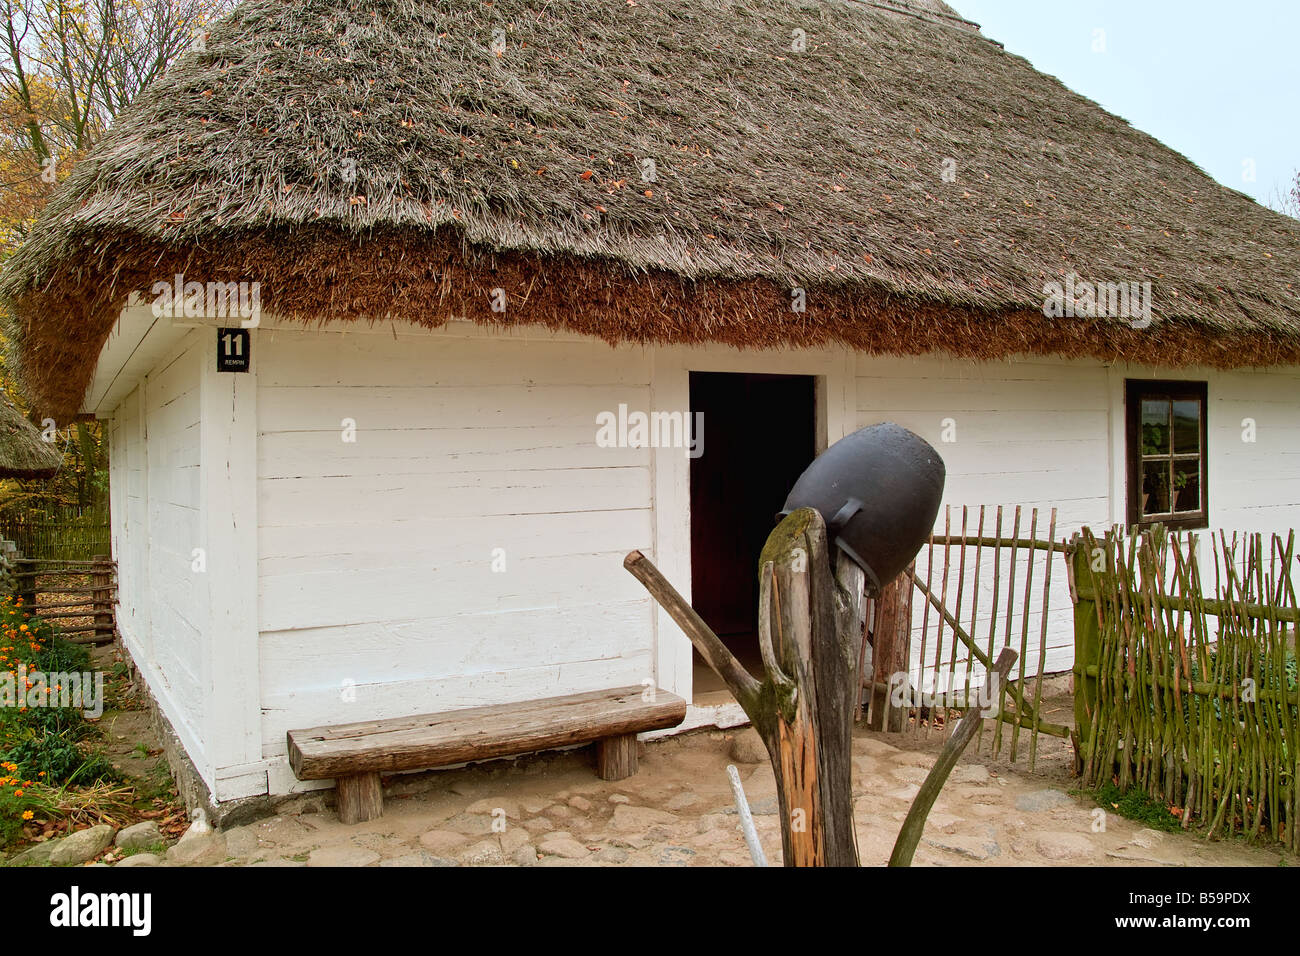 The turn of XIX and XX century thatched roof cottage Stock Photo